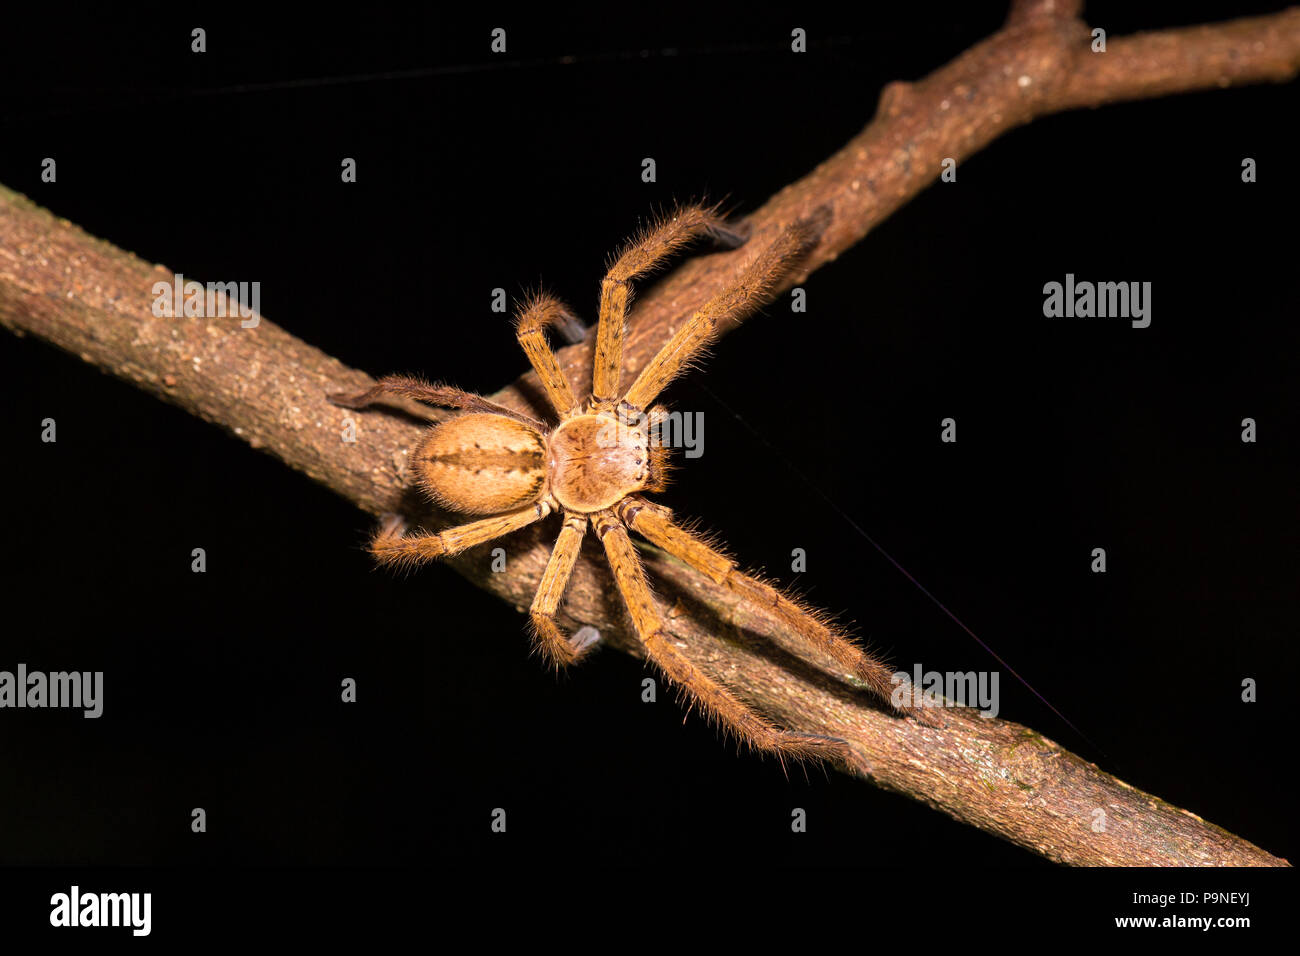 A Badge Huntsman Spider walking along a branch at night in the rainforest. Stock Photo